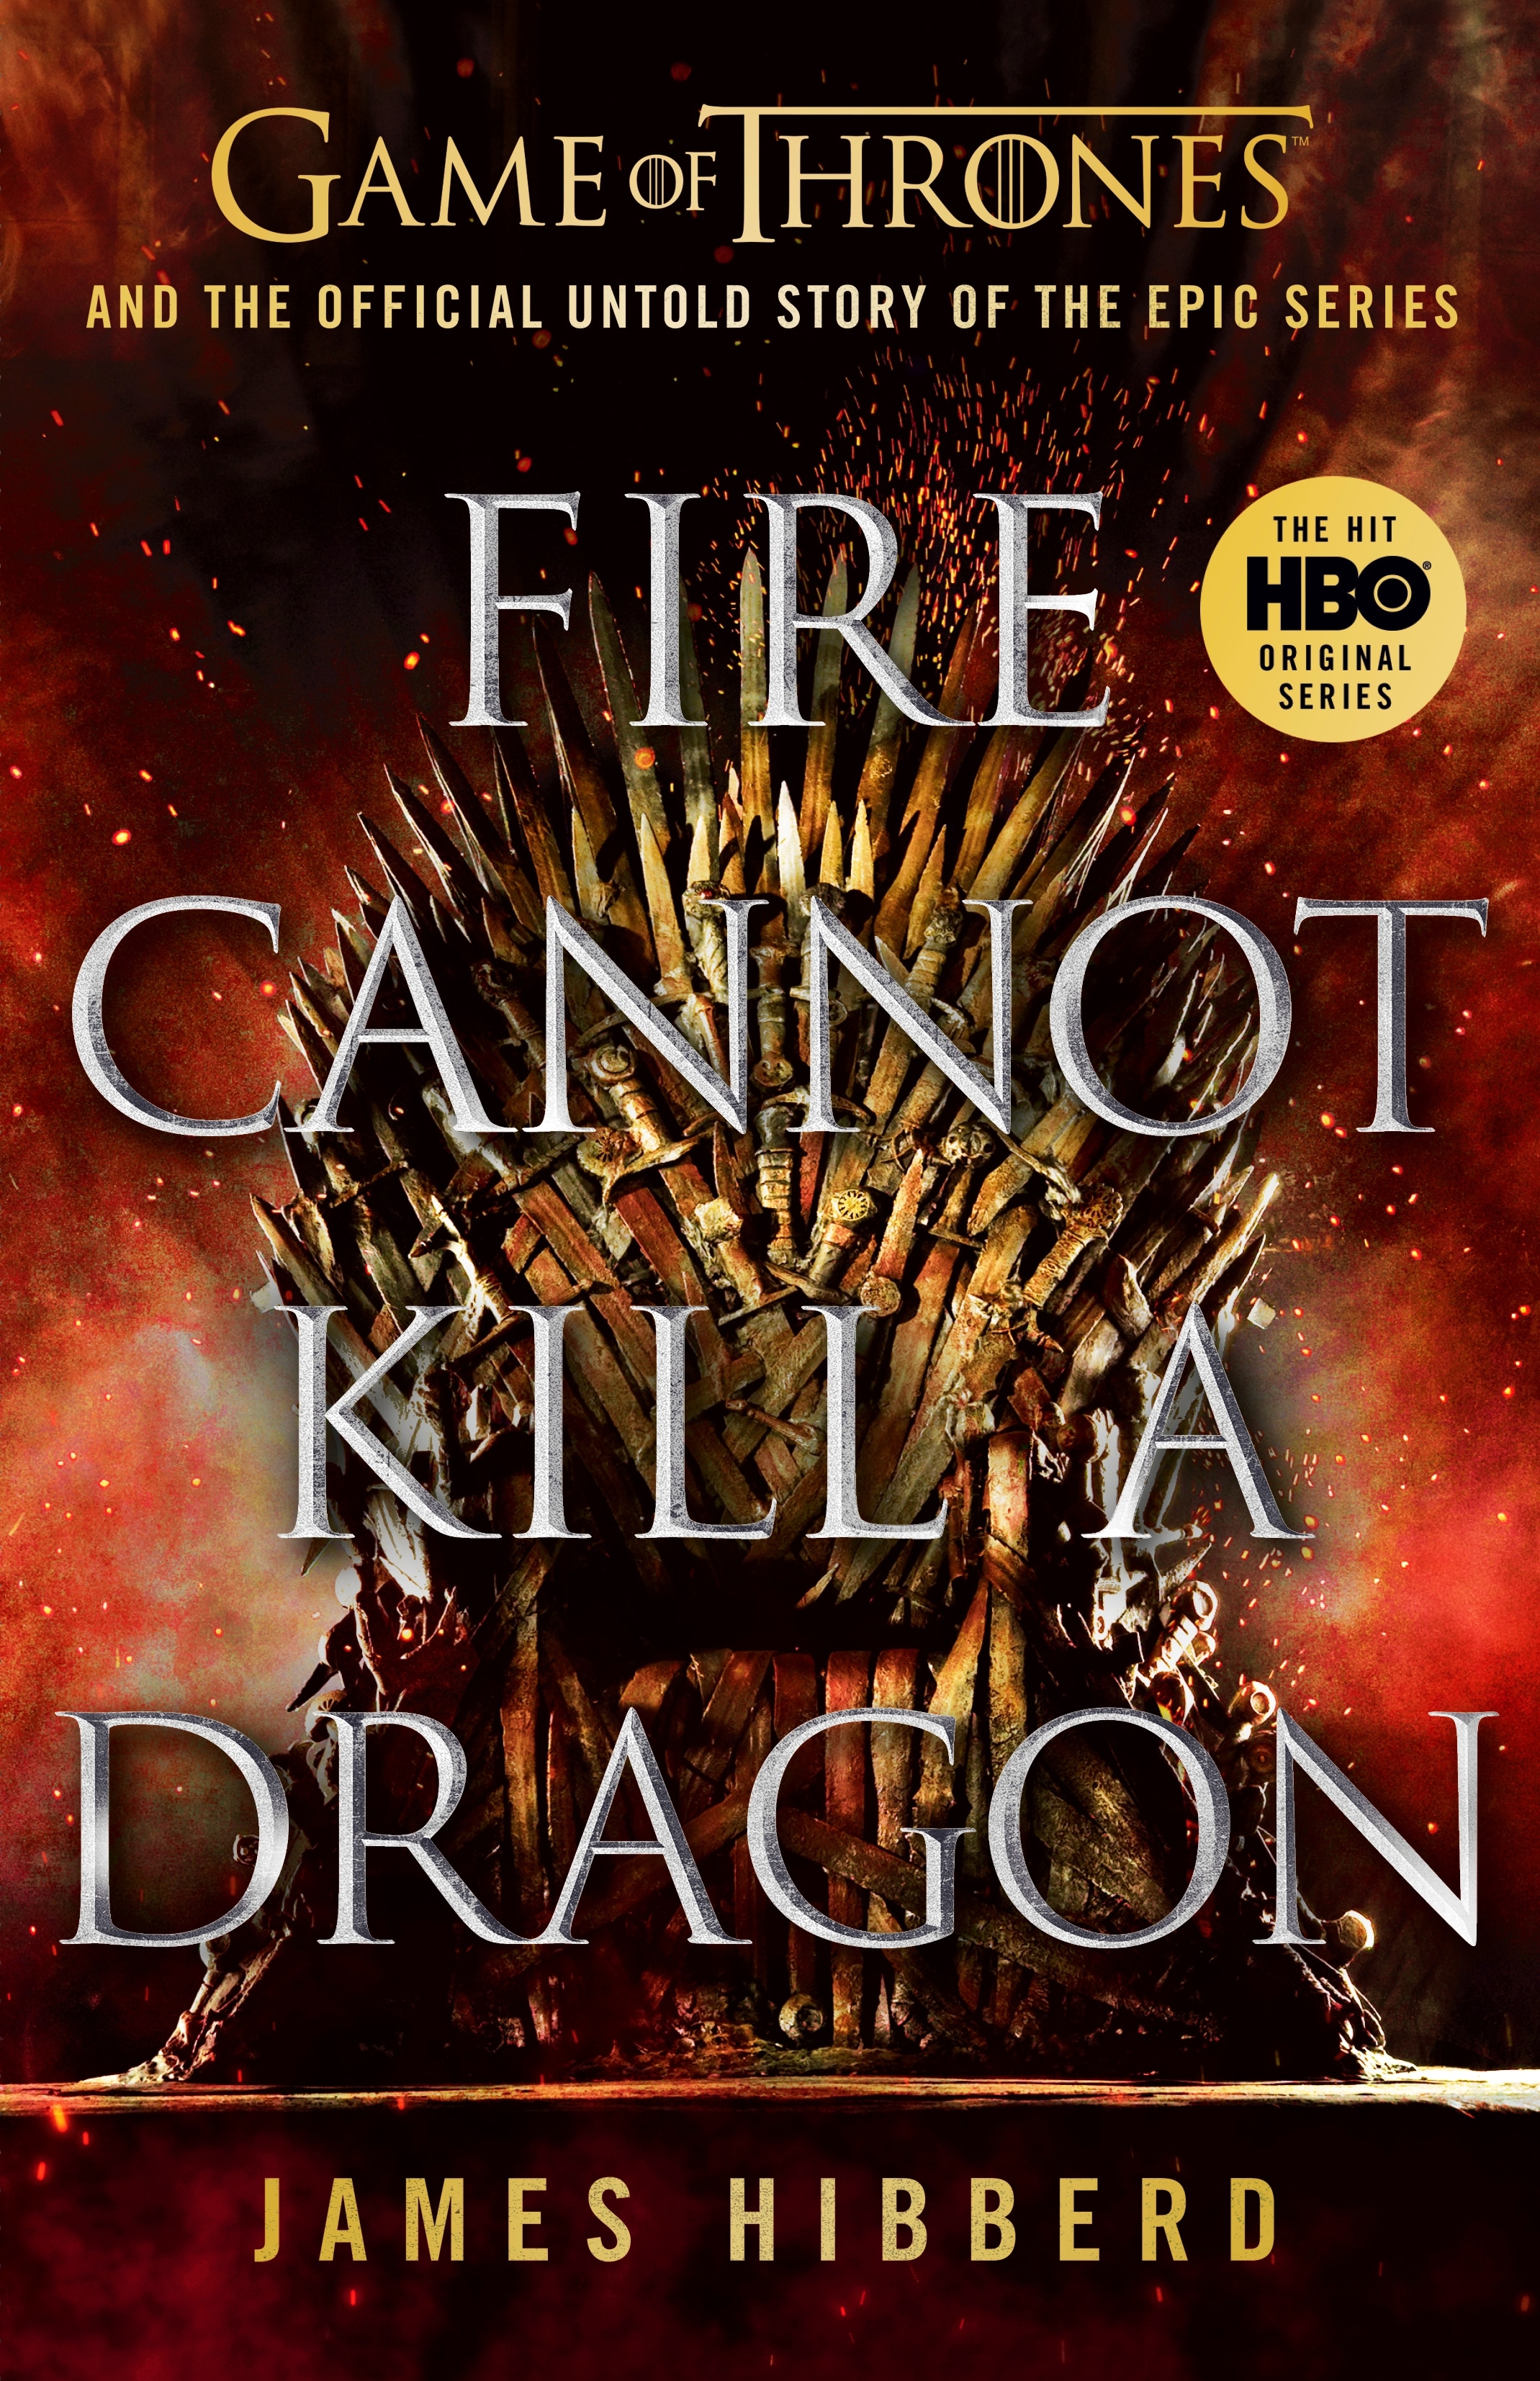 Book “Fire Cannot Kill a Dragon” by James Hibberd — October 6, 2020